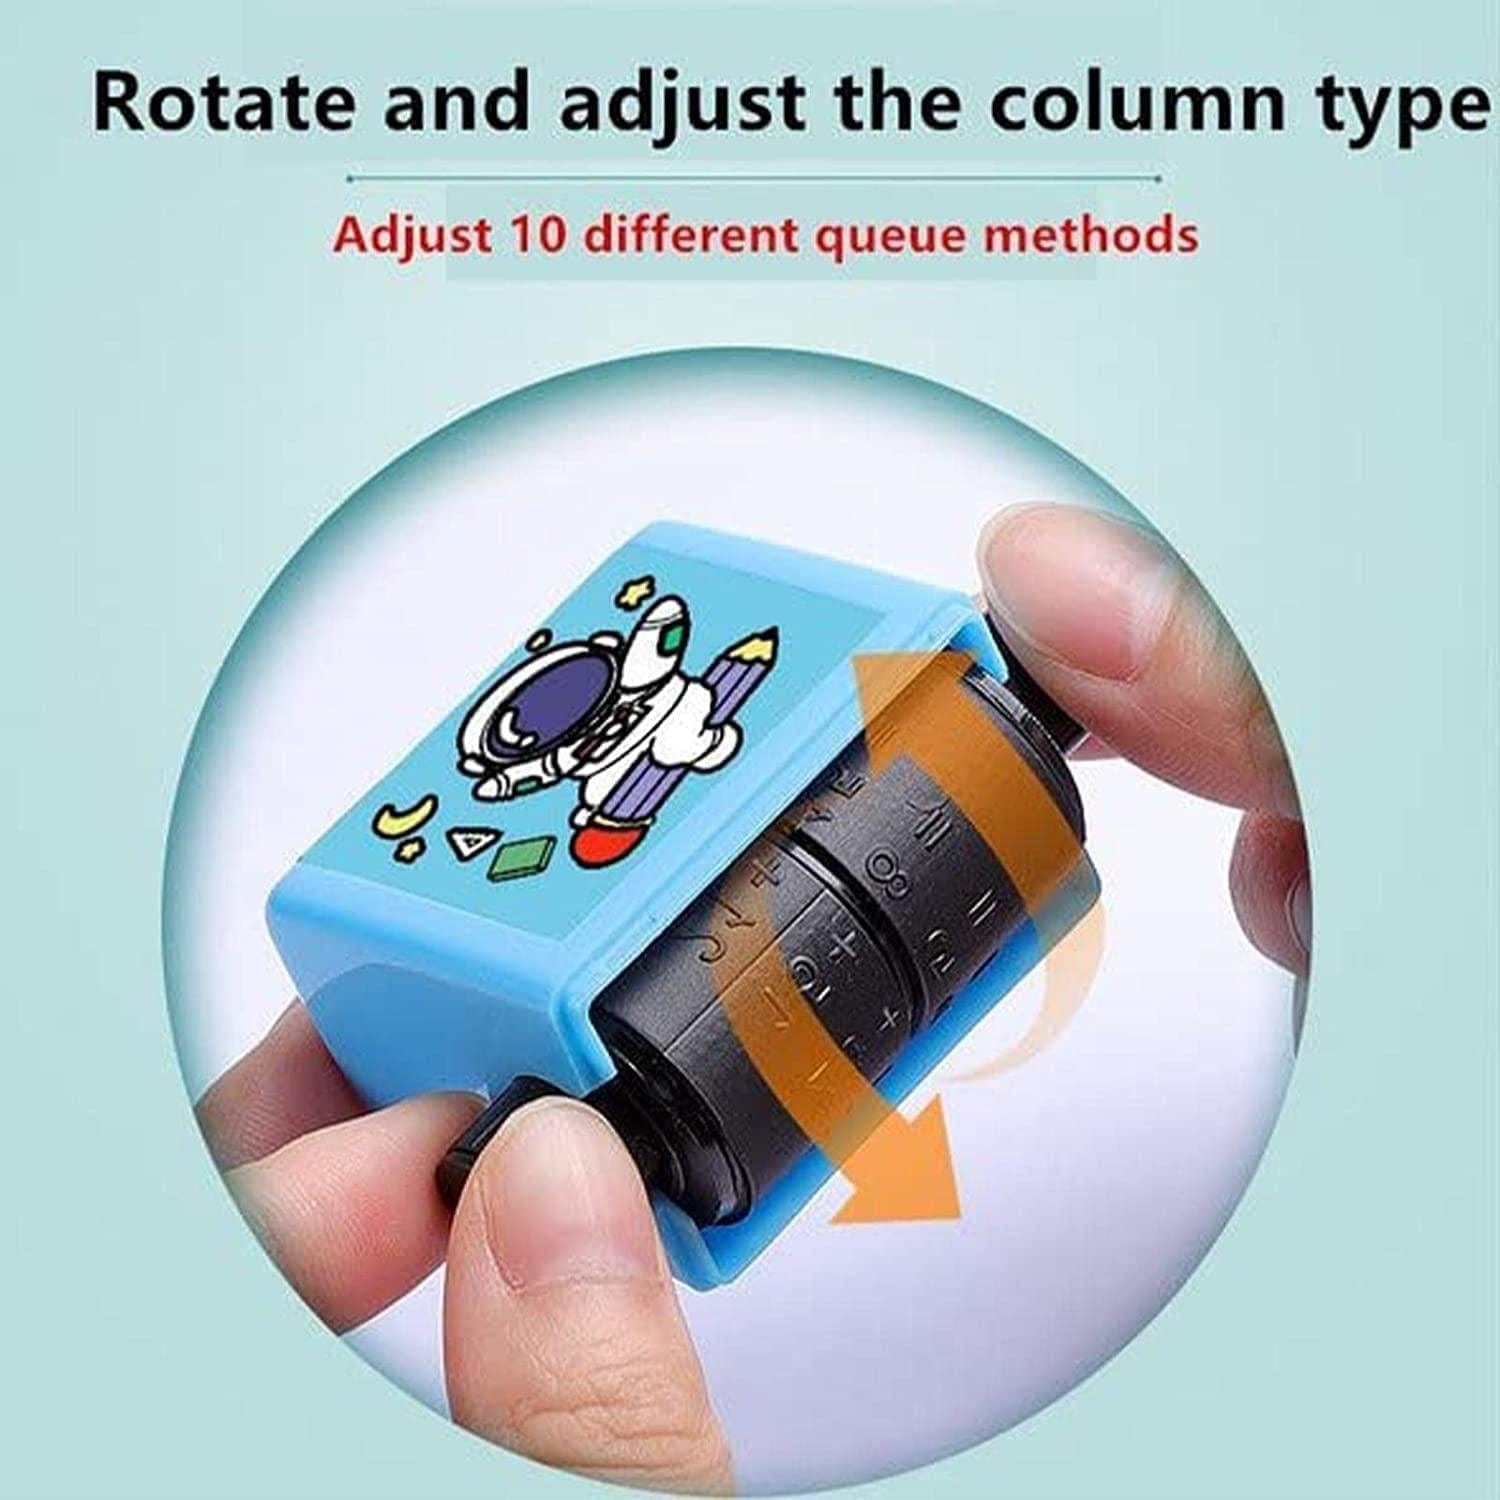 Roller Design Digital Teaching Stamp, Math Stamps Practice Tools Within 100 Supplies Educational for Preschool All Arithmetic (1 Pcs) Roposo Clout